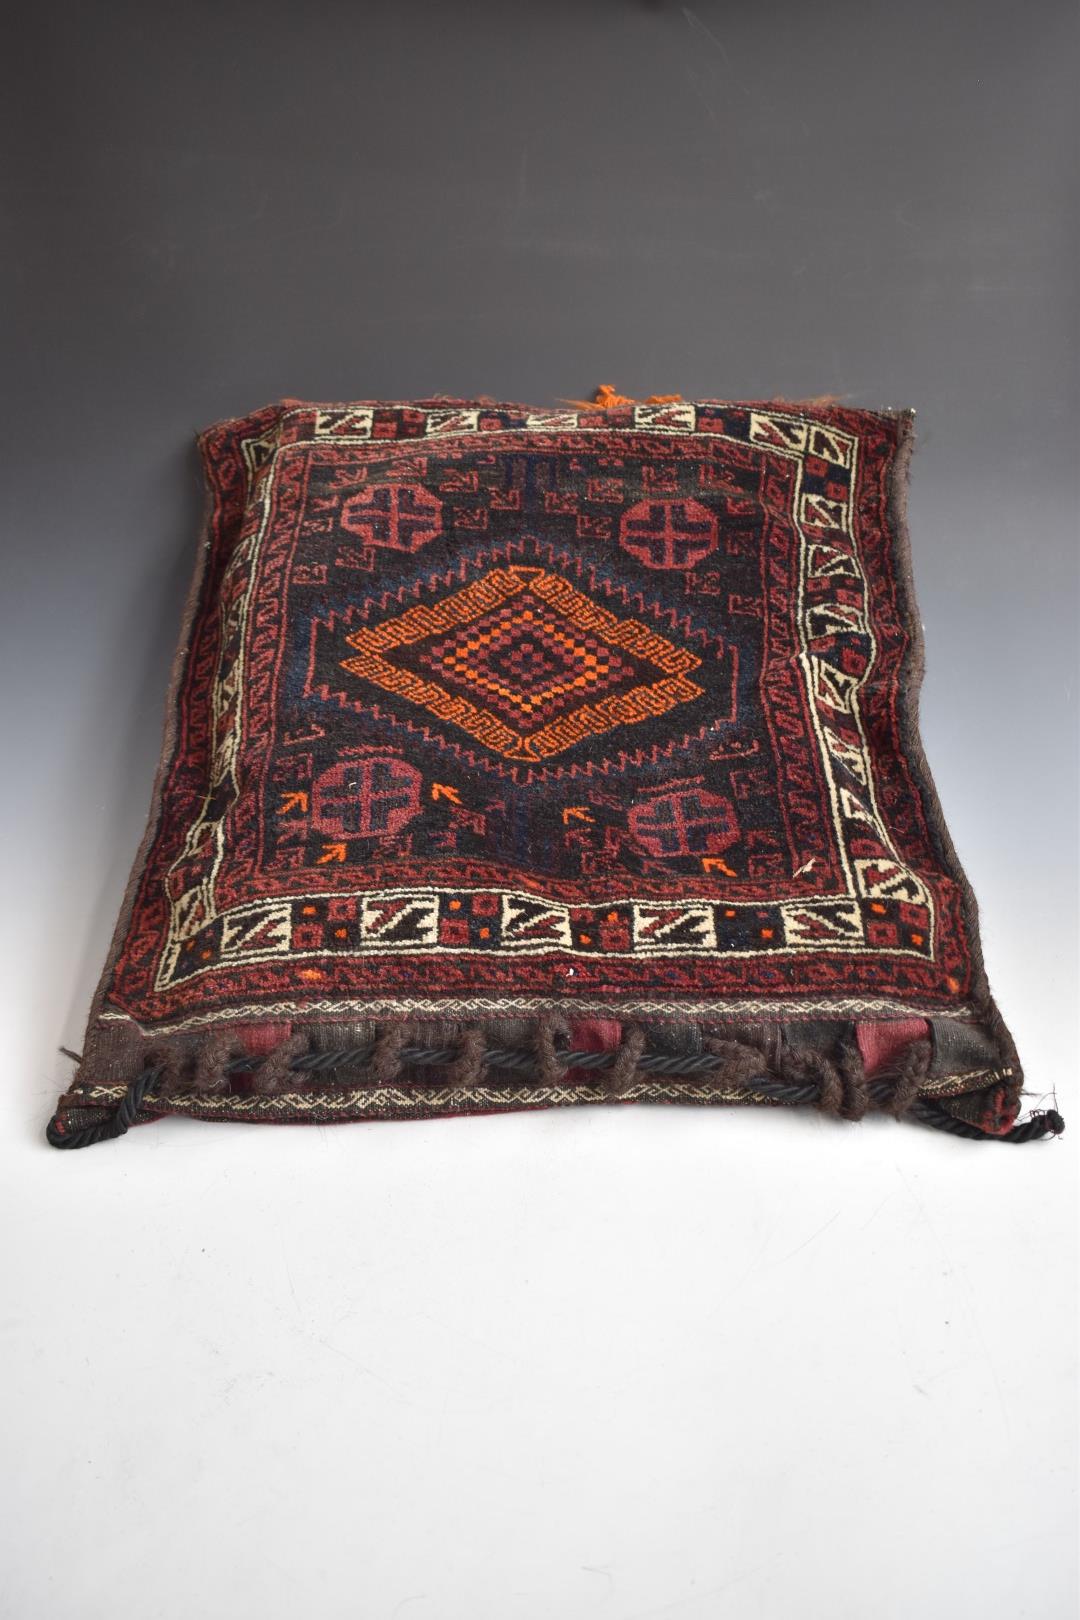 A pair of North African camel bags / cushions, 70 x 65cm - Image 2 of 2